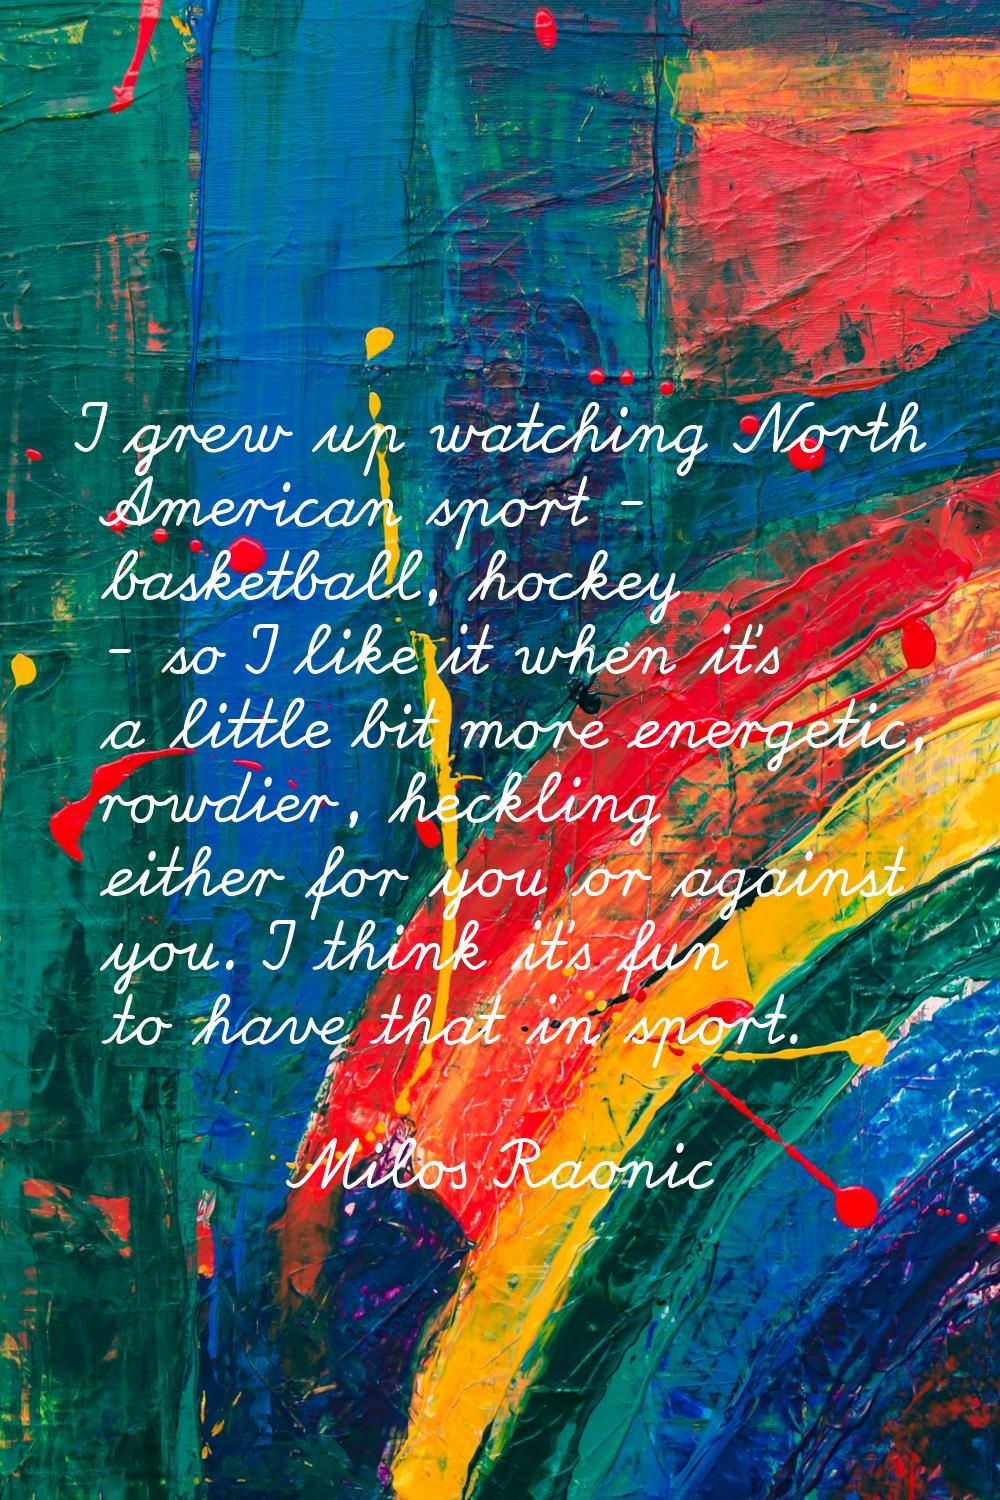 I grew up watching North American sport - basketball, hockey - so I like it when it's a little bit 